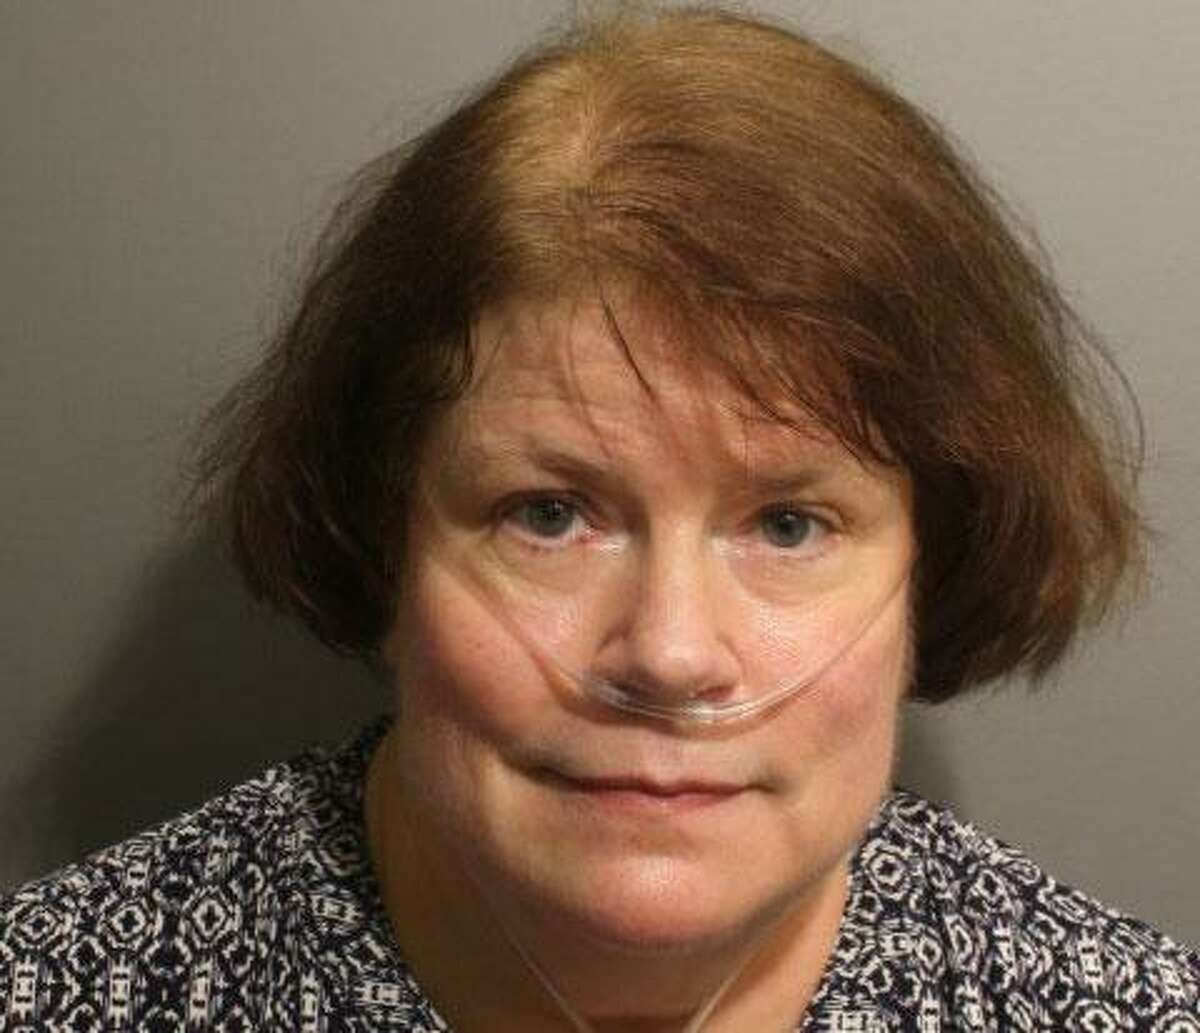 Mary L. McArdle, 64, of Wilton, was arrested for driving while under the influence on Aug. 19, 2019.